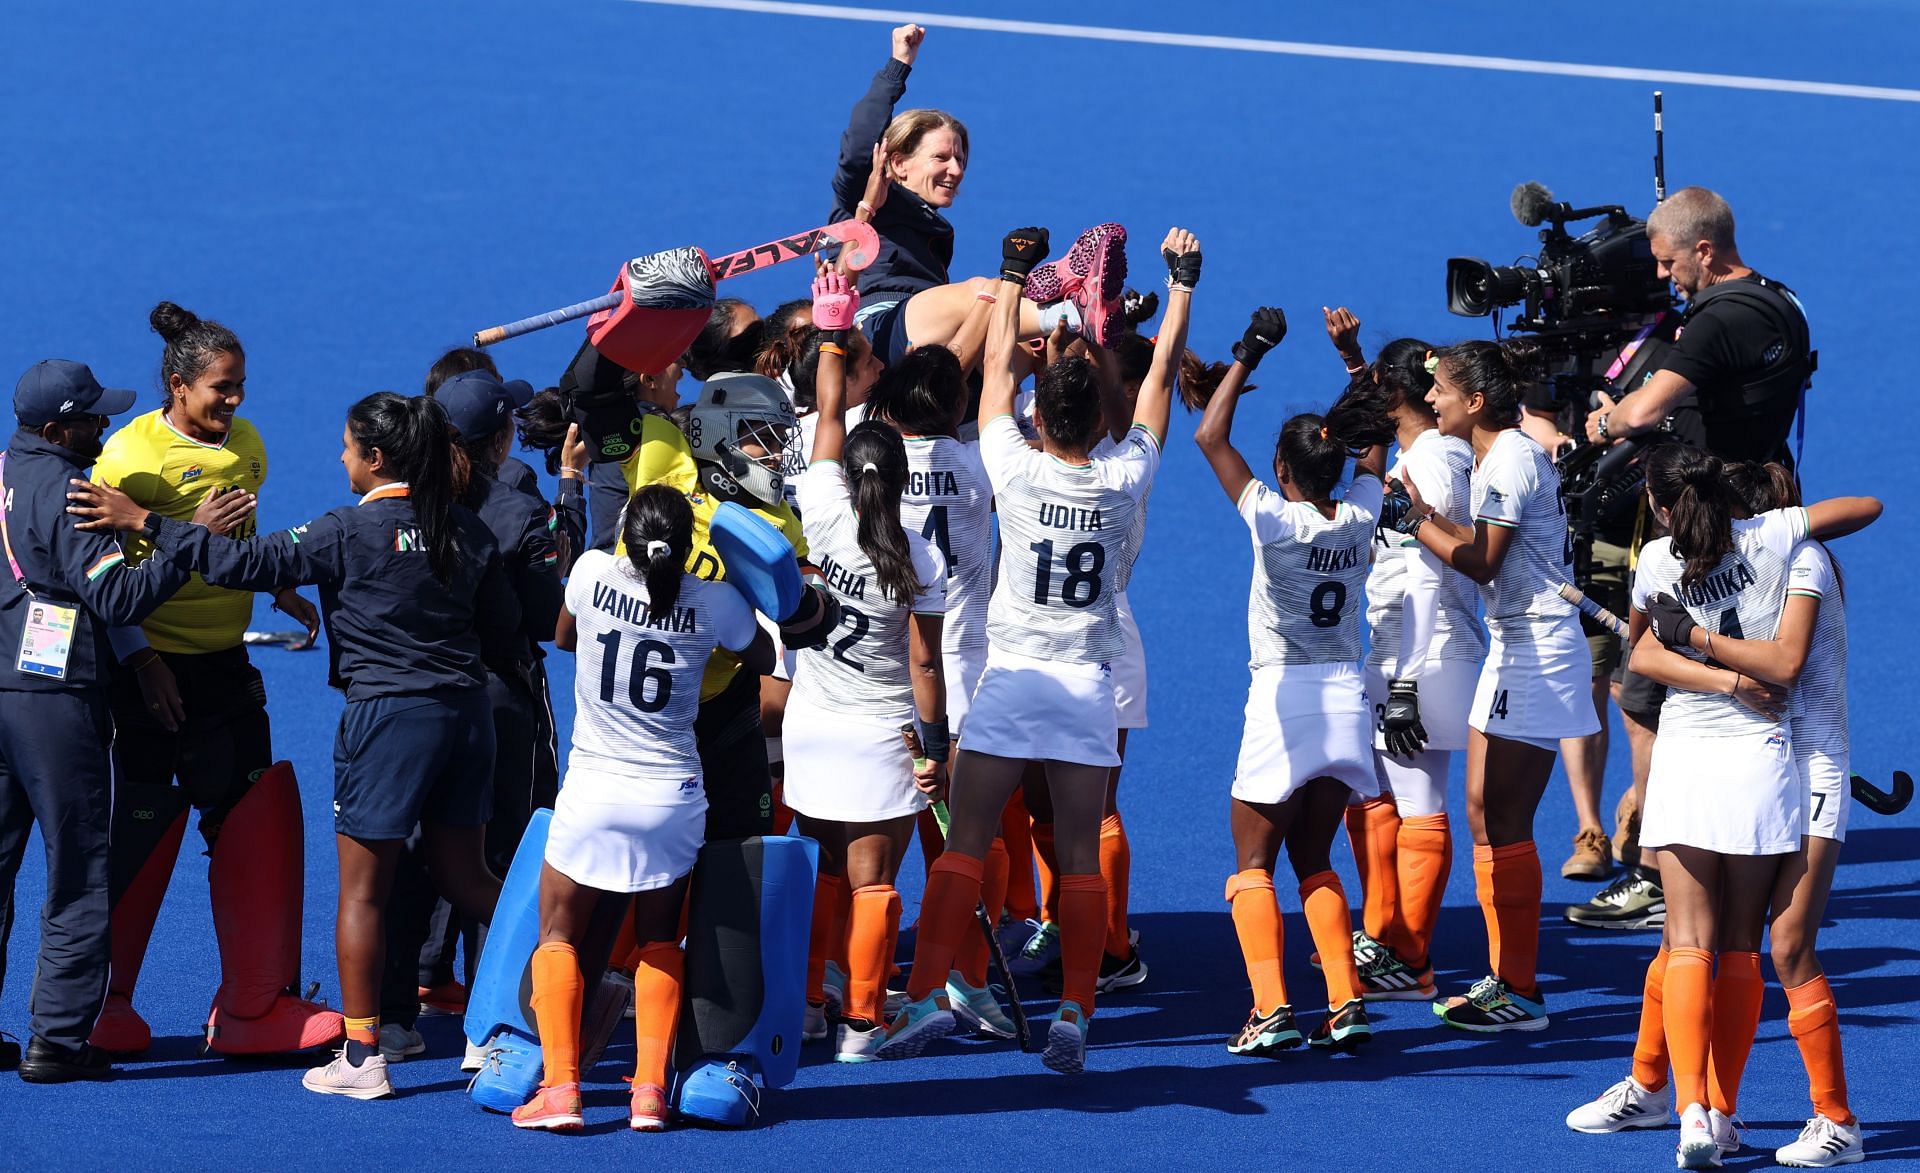 Celebration time after a stupendous win for the Indian girls